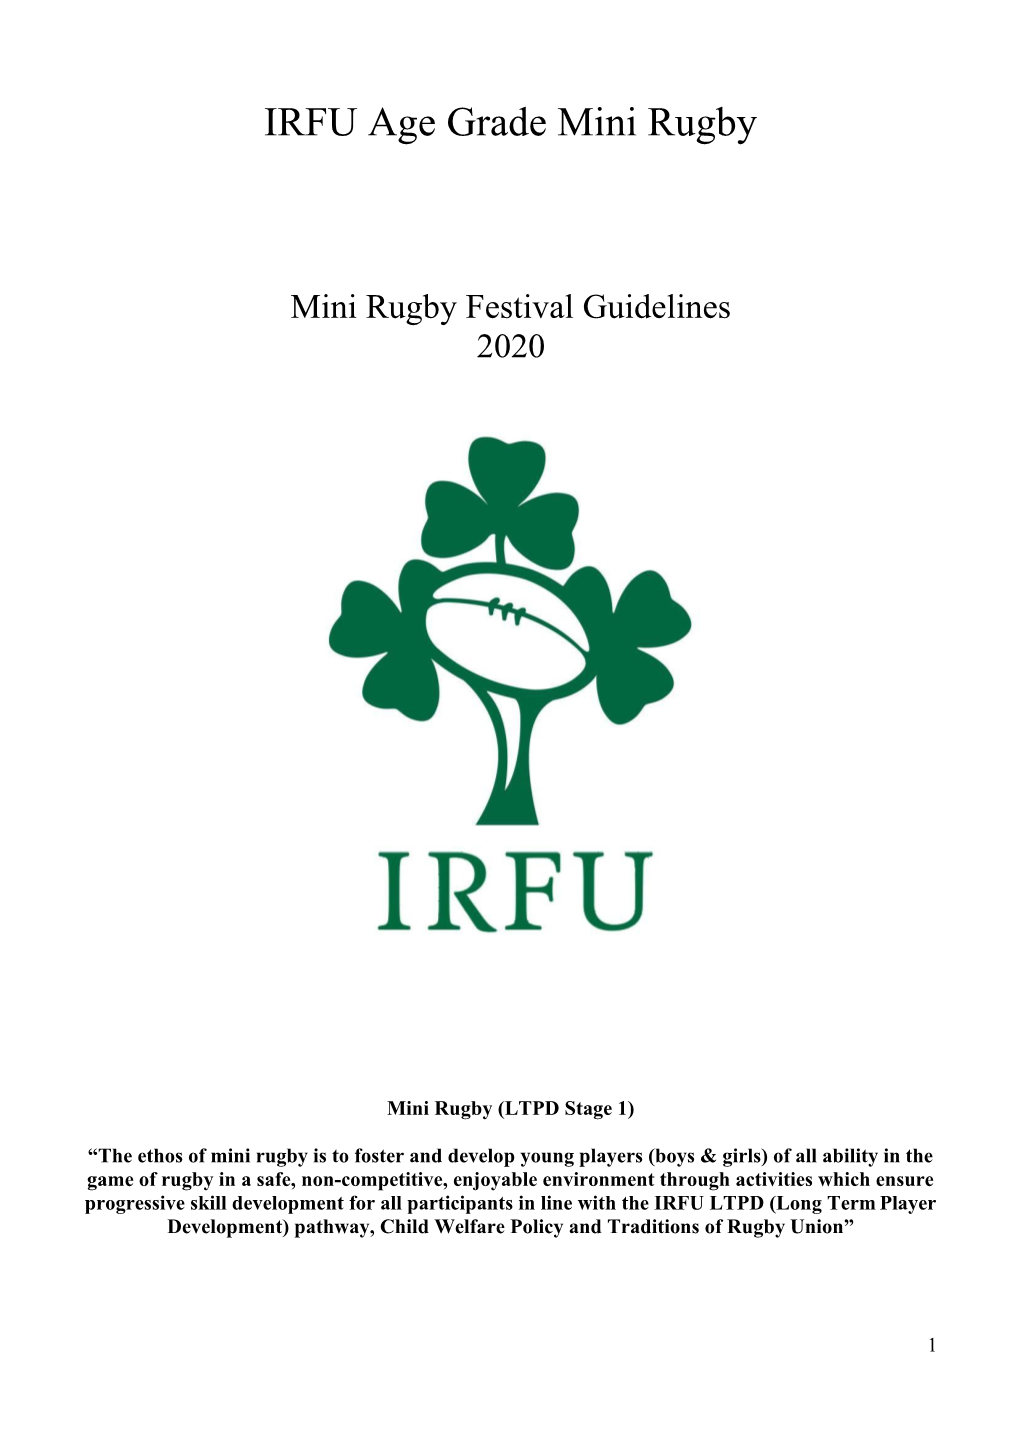 Mini Rugby Festival Guidelines 2020-2021